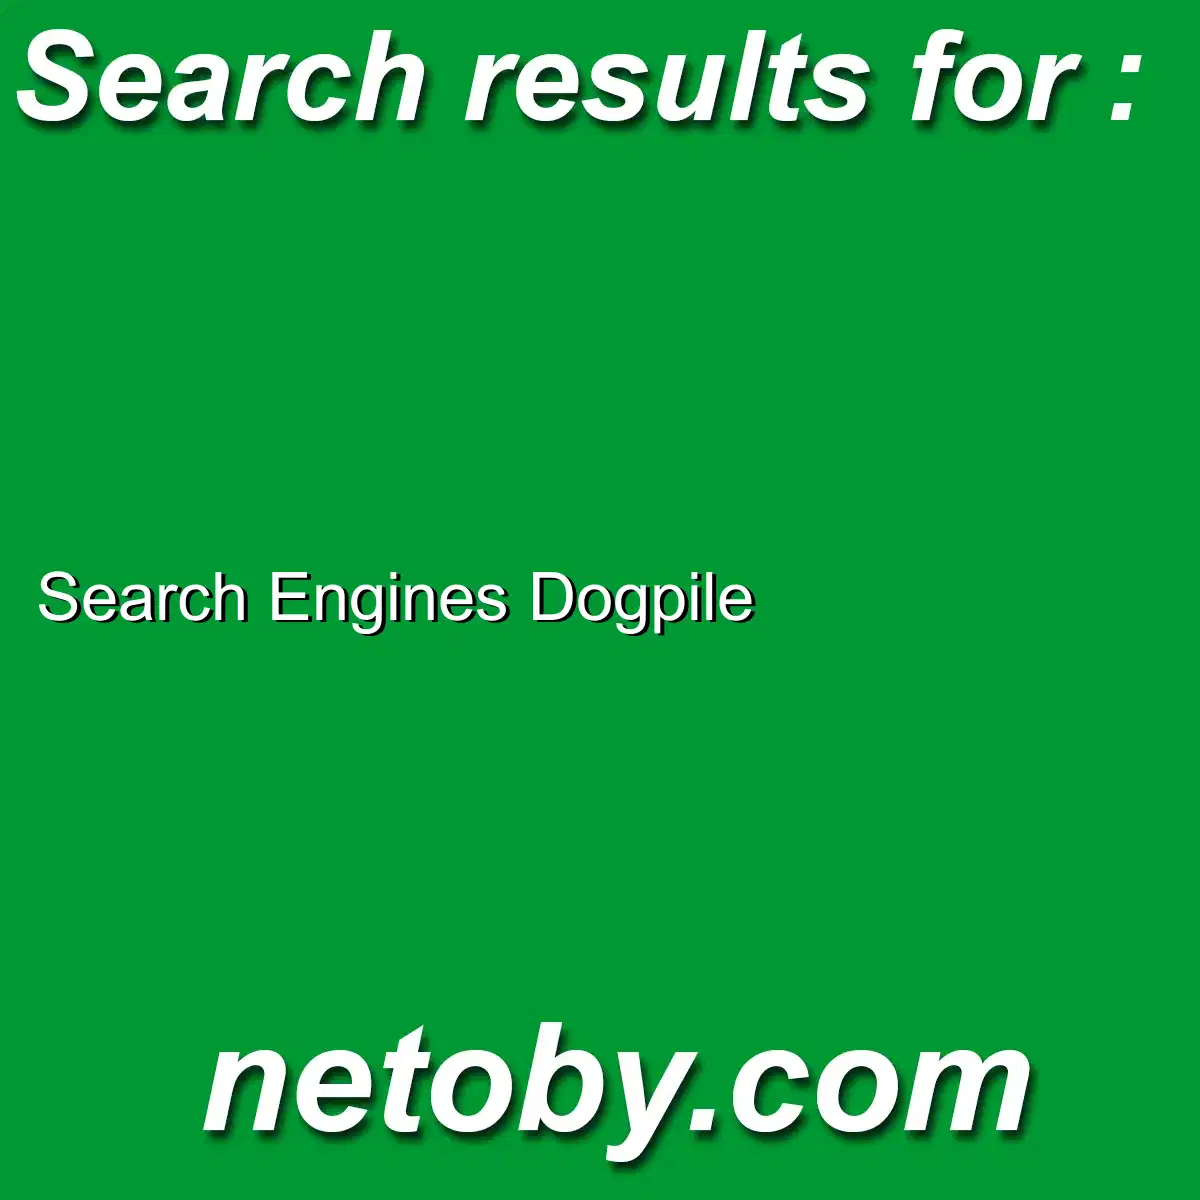 ﻿Search Engines Dogpile